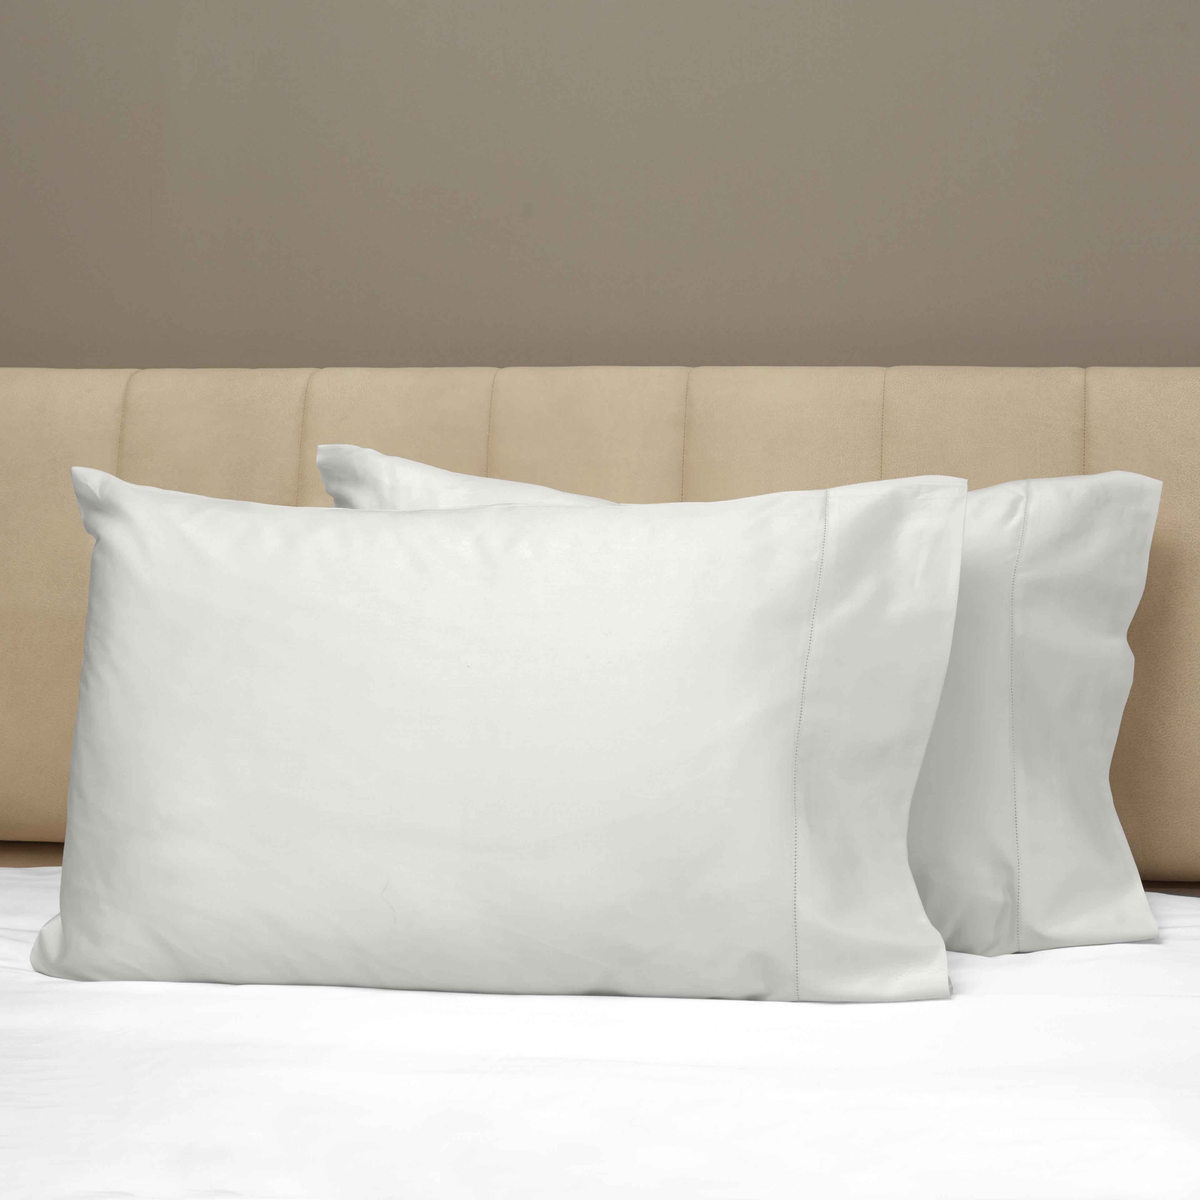 Front View of Signoria Nuvola Bedding Pillowcases in Pearl Color